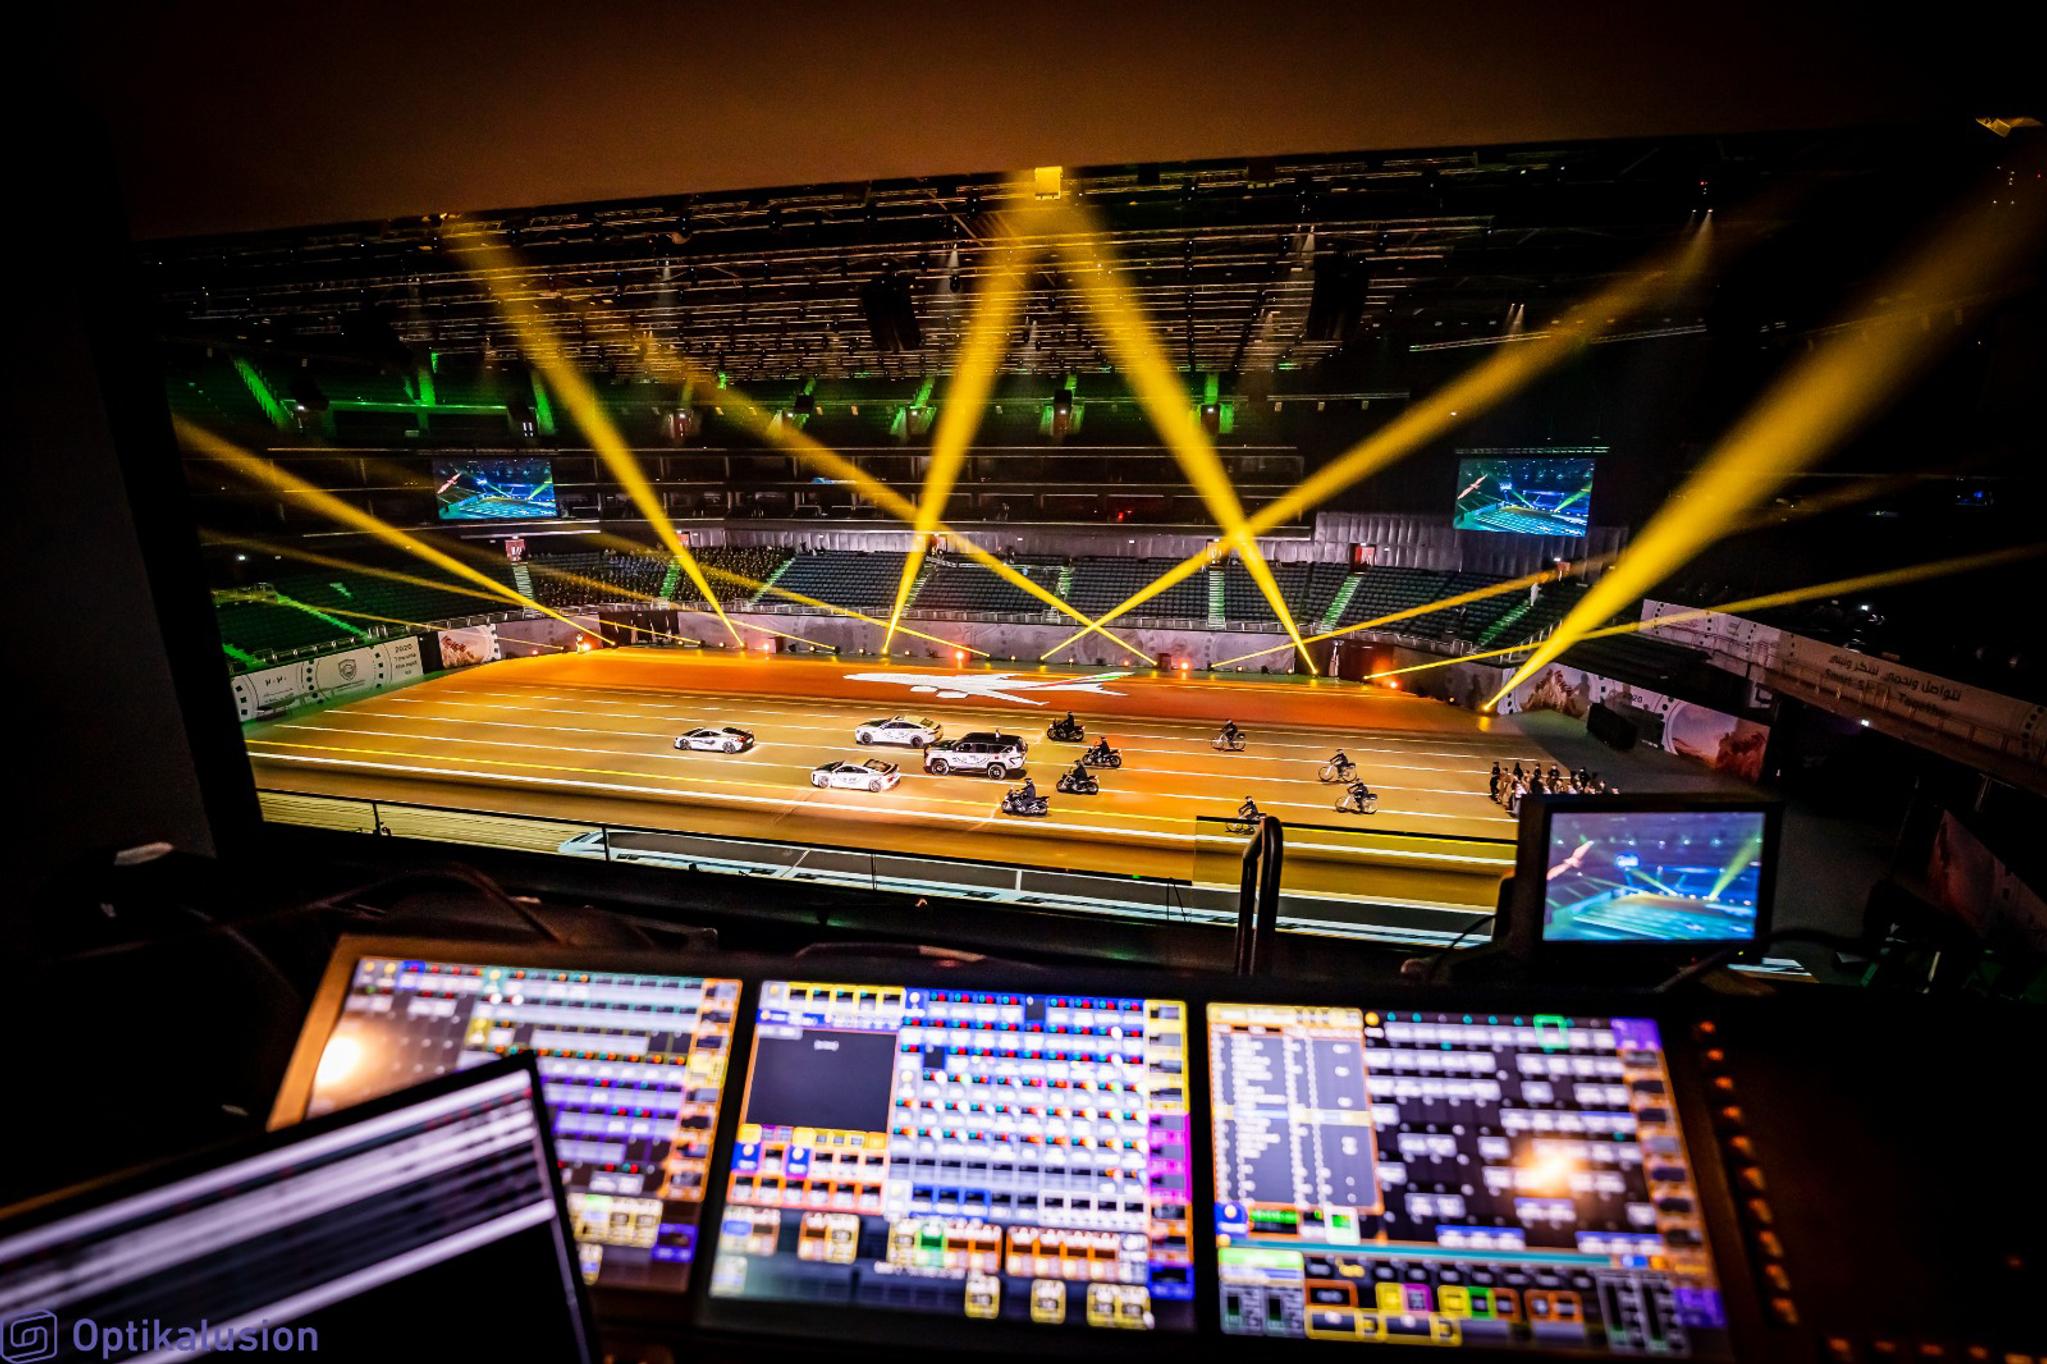 An indoor arena as seen from the tech booth. Beams of orange spotlights emit from the ground and cars drive over projection mapped content on the ground.